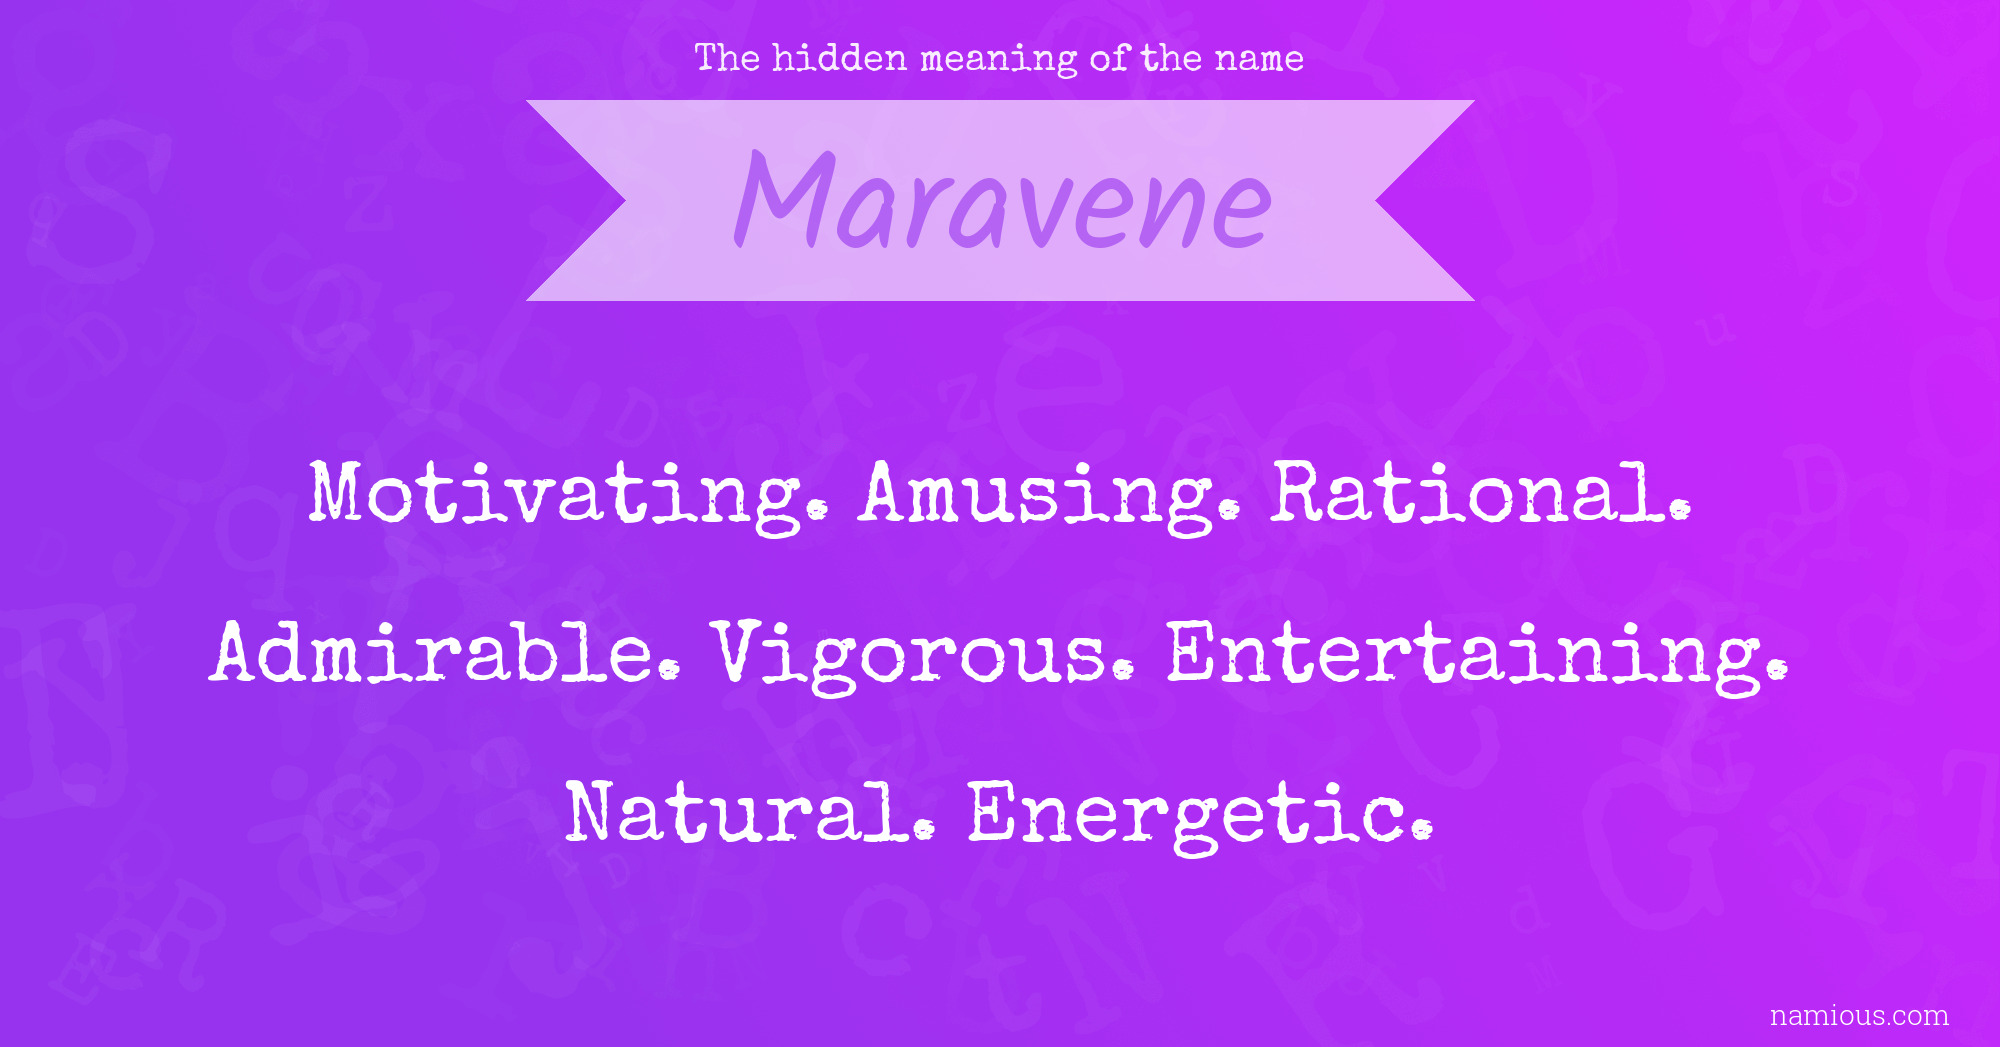 The hidden meaning of the name Maravene